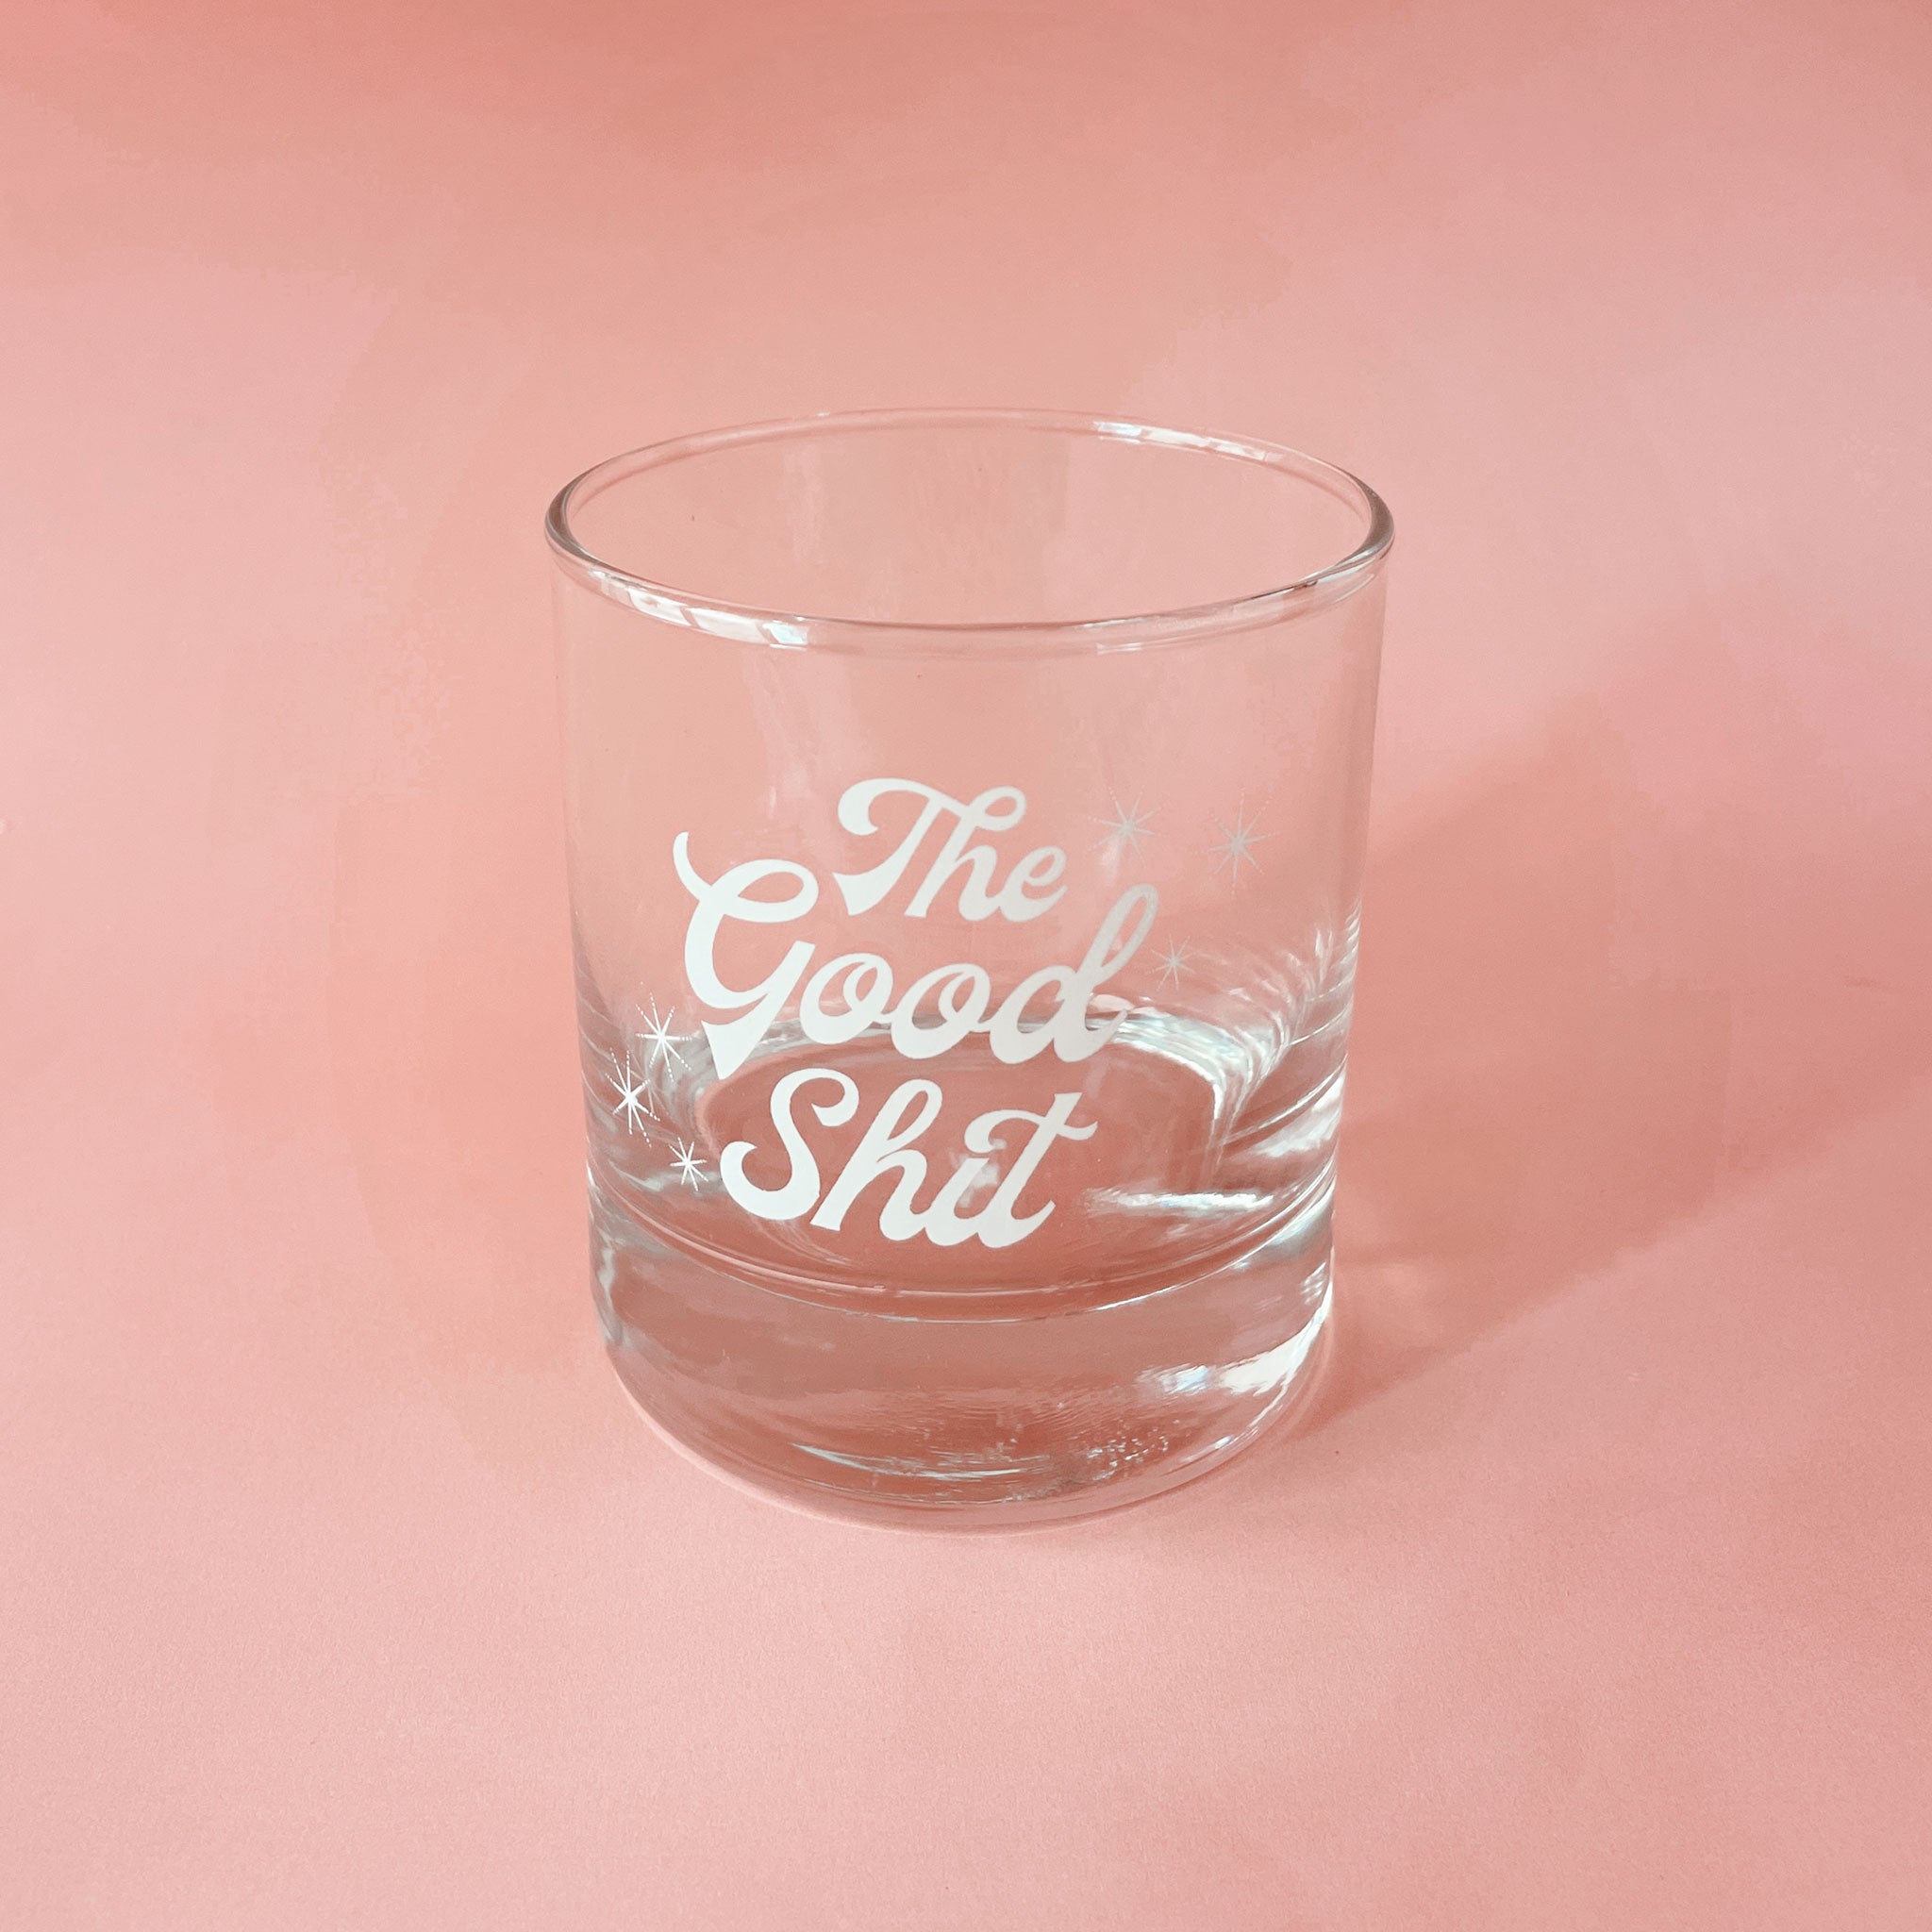 Against a peachy pink background is a photograph of a short glass tumbler with a thick bottom and &quot;The Good Shit&quot; printed across the center in white groovy cursive text.